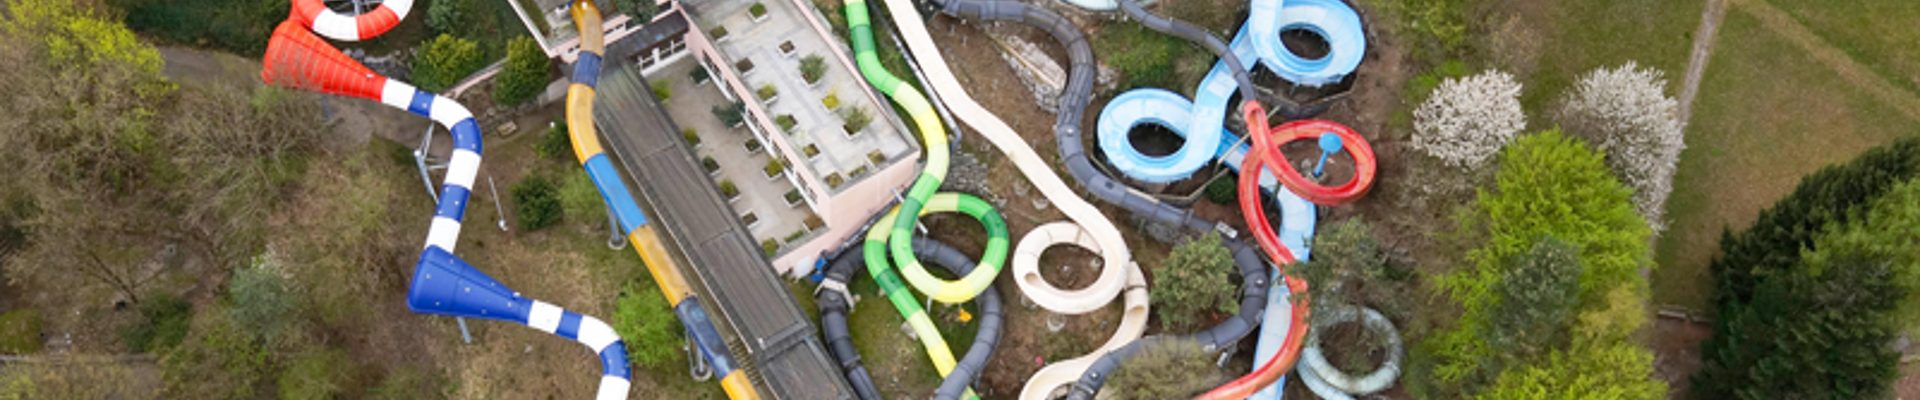 Ultimate waterslides and pure Swiss madness